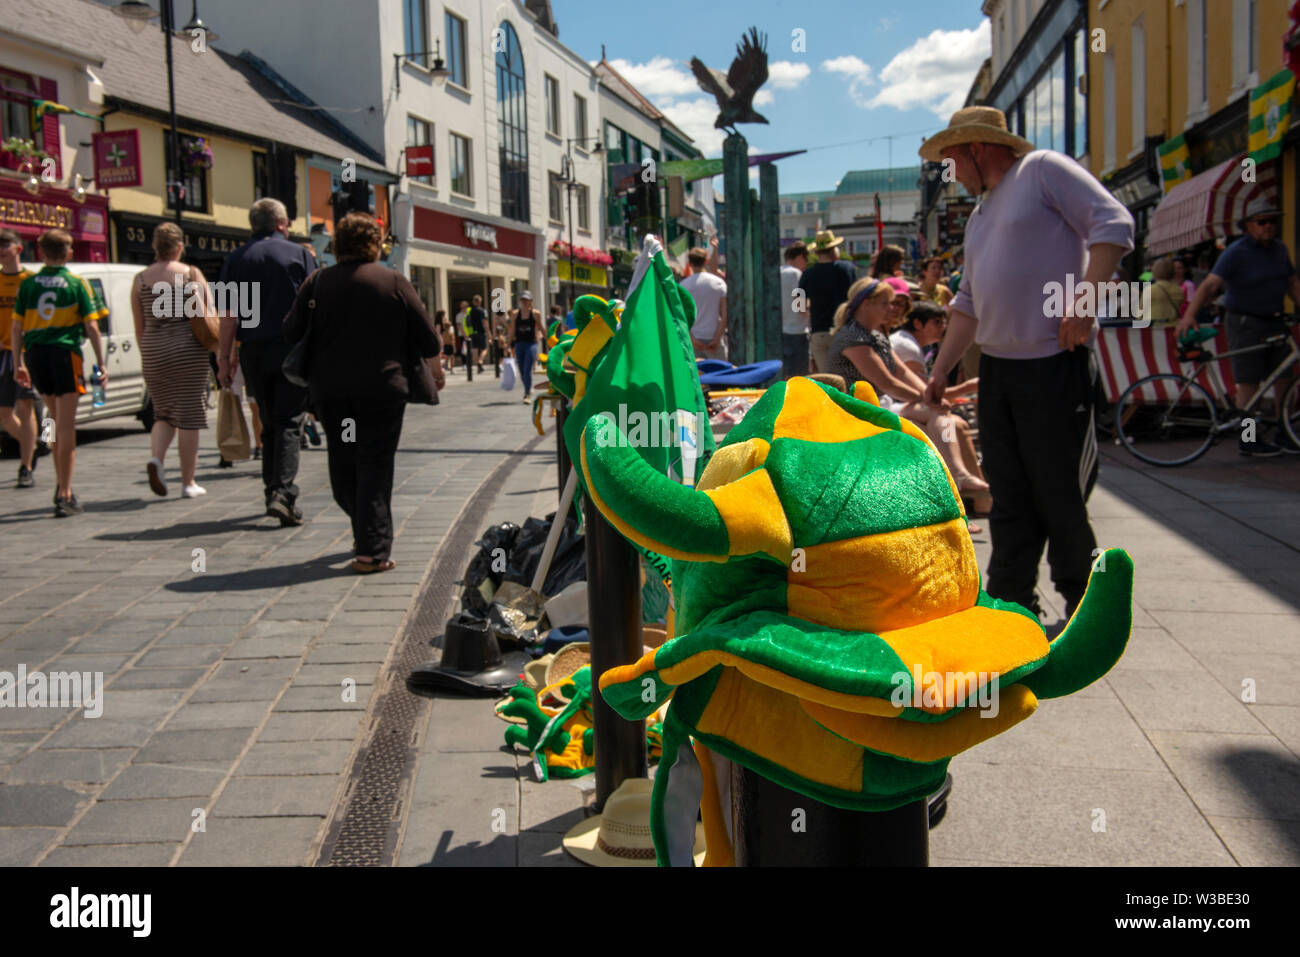 Match day in Killarney, County Kerry, Ireland. Street vendor selling Kerry Gaelic football memorabilia on Main Street before the Mayo and Kerry game in July 2019. Stock Photo